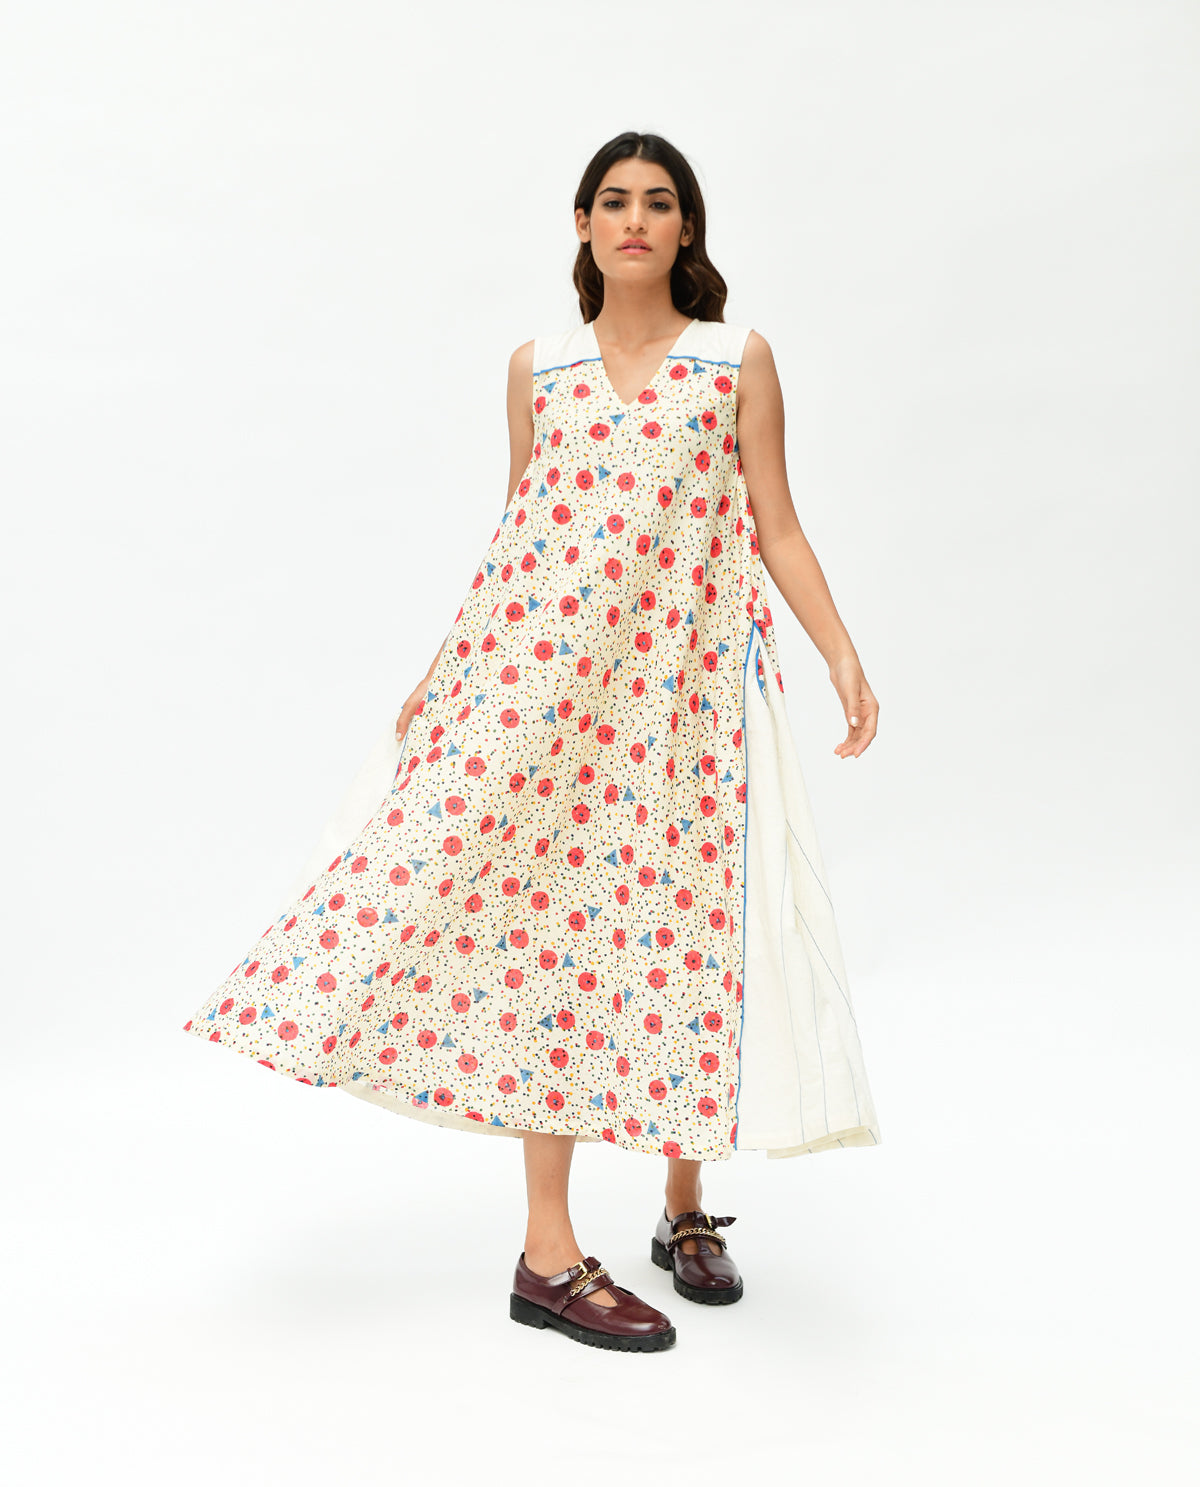 Handblock Printed Maxi Dress at Kamakhyaa by Rias Jaipur. This item is 100% Organic Cotton, Casual Wear, Handblock Printed, Handspun, Handwoven, Maxi Dresses, Off-White, Prints, Relaxed Fit, Sleeveless Dresses, Void, Womenswear